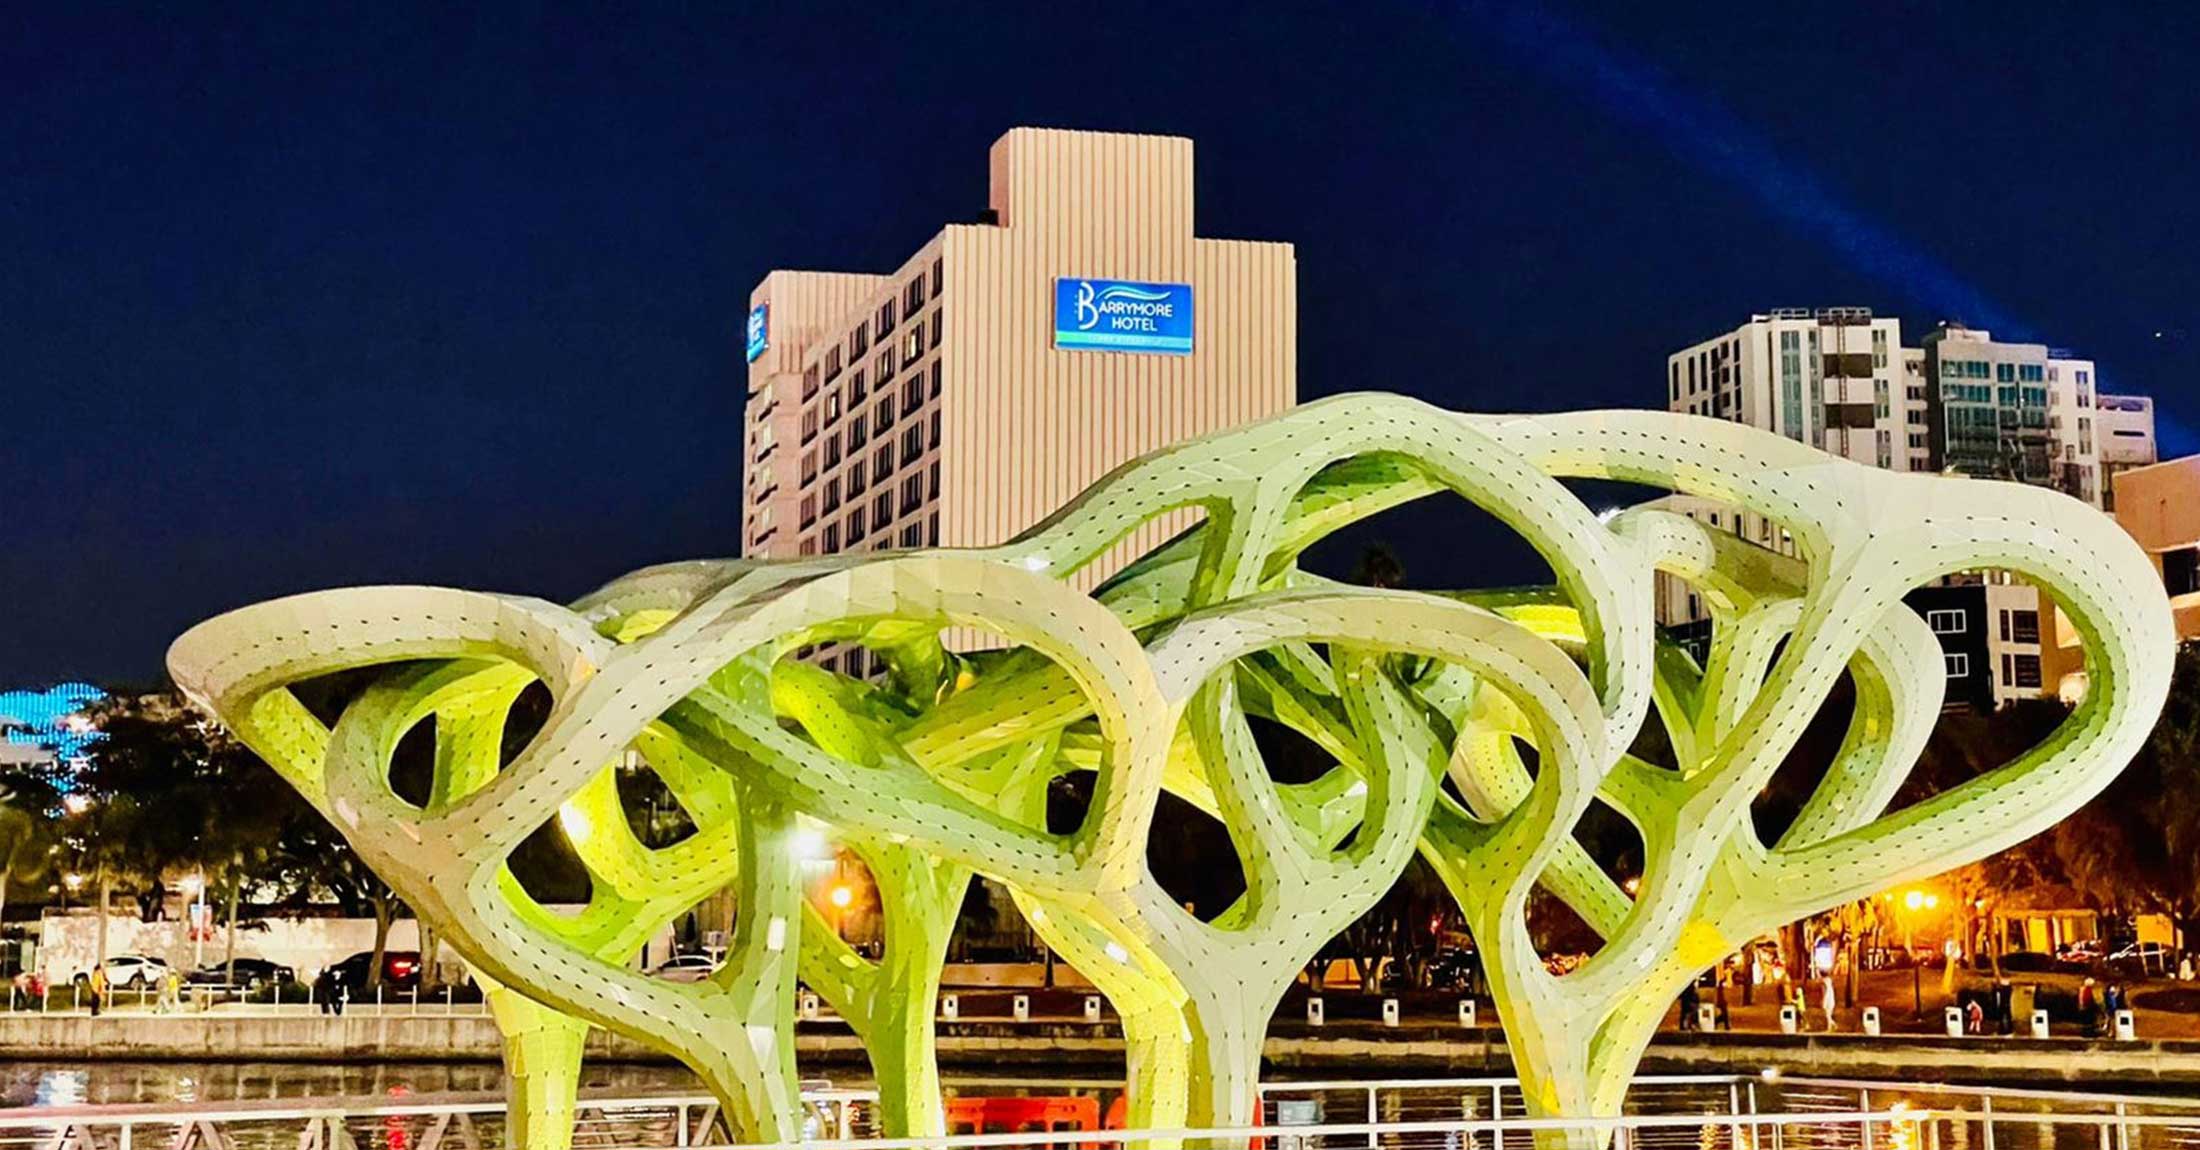 alternate night view of hotel from across river from green public art installation